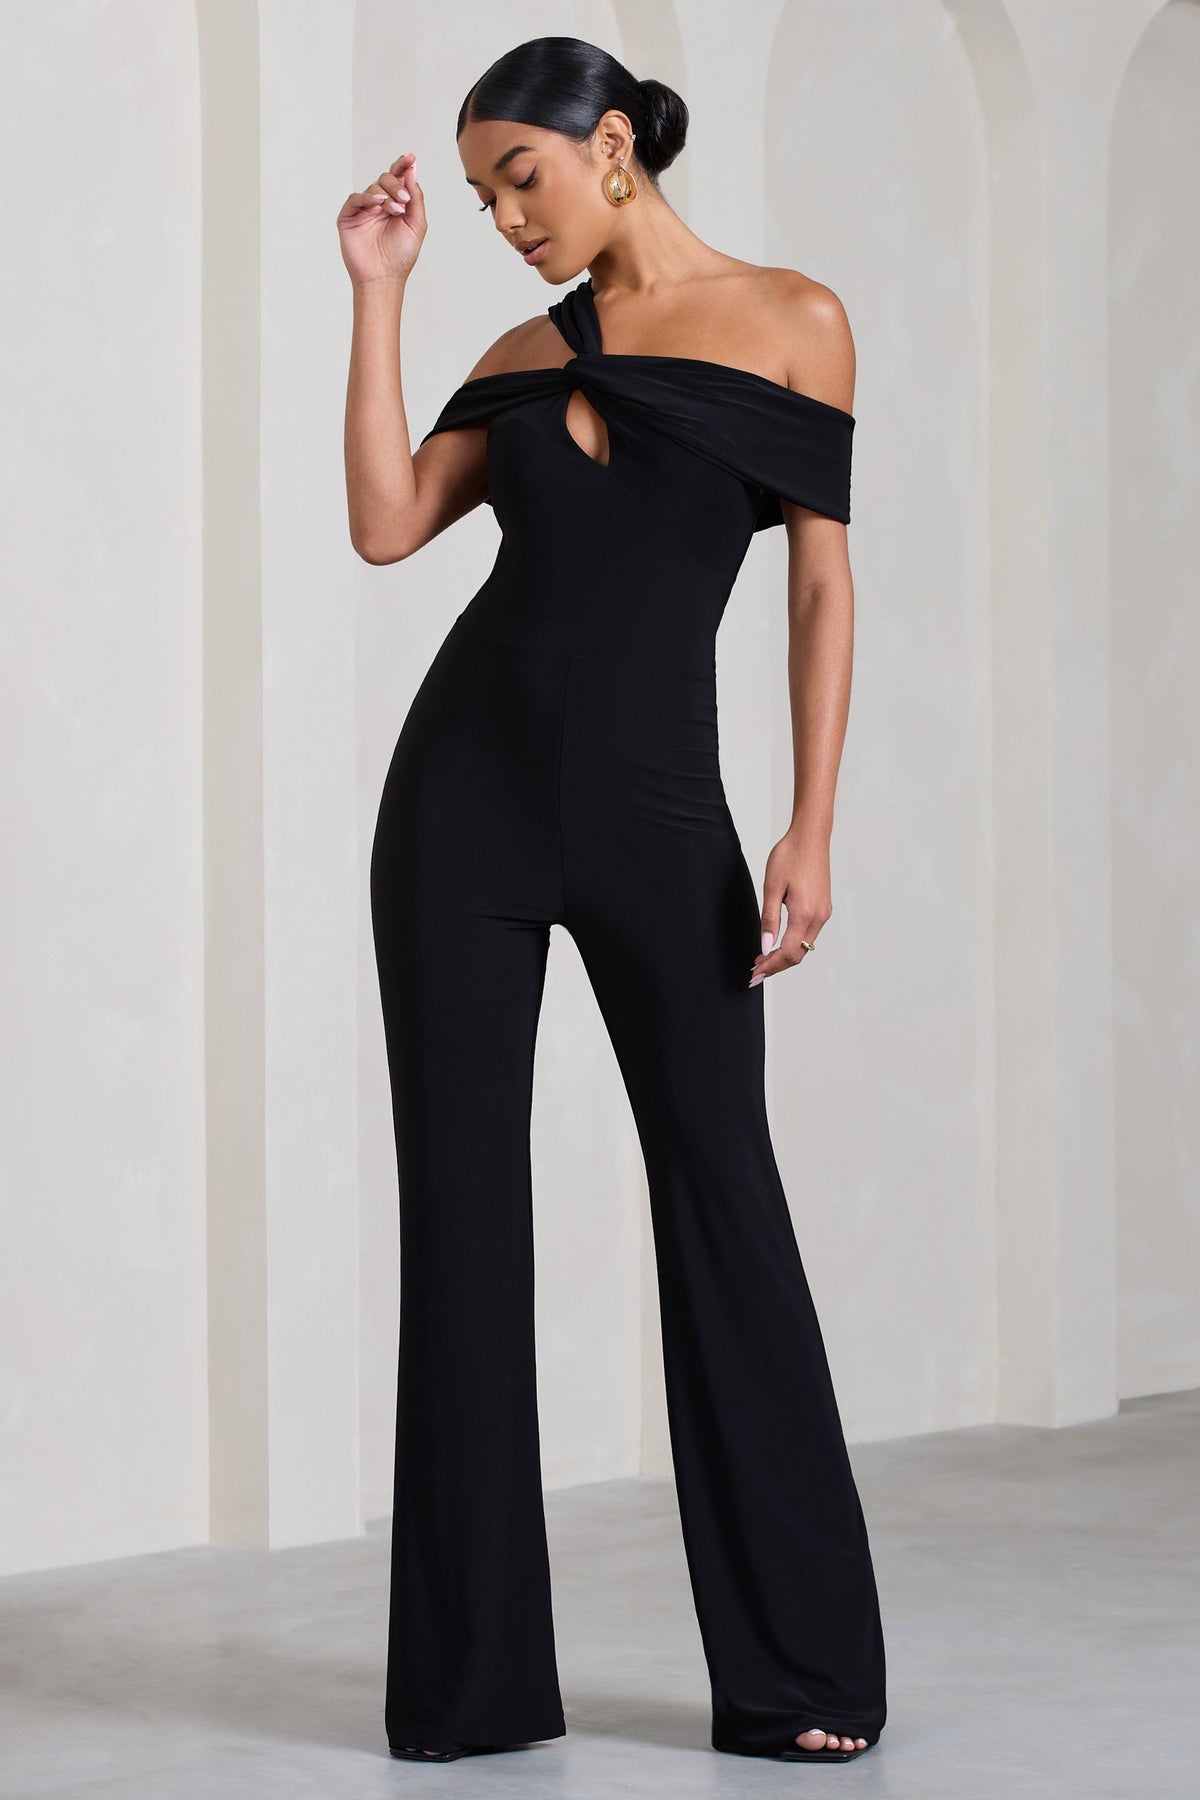 Express | Strappy Back Culotte Jumpsuit in Black | Express Style Trial